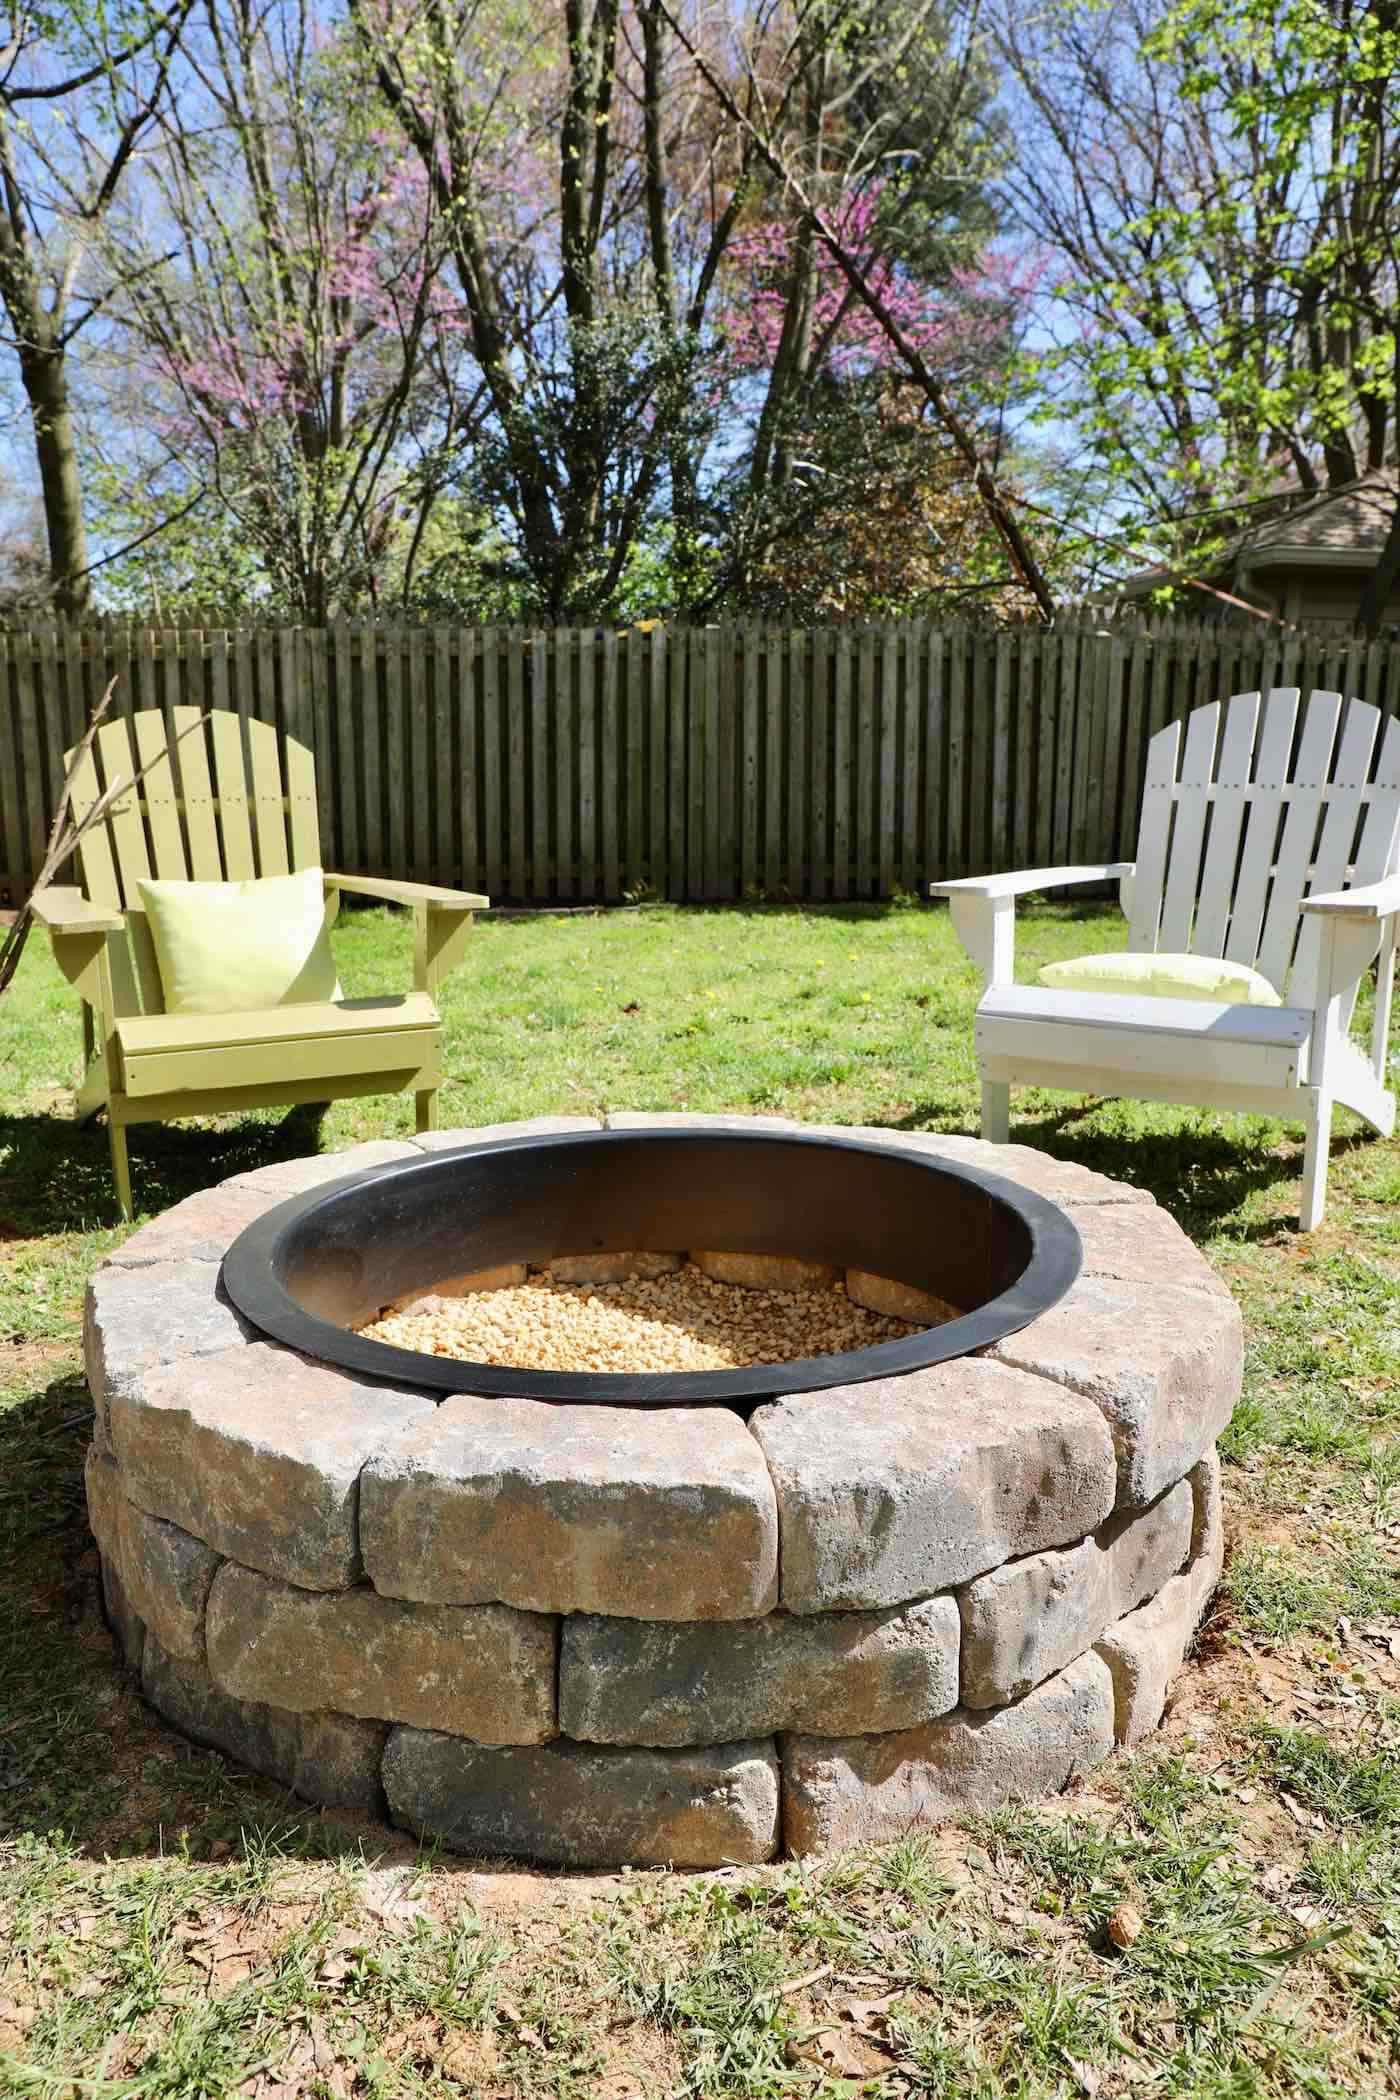 Backyard Bonfire Pit
 How to Build a Fire Pit in Your Backyard I Used a Fire